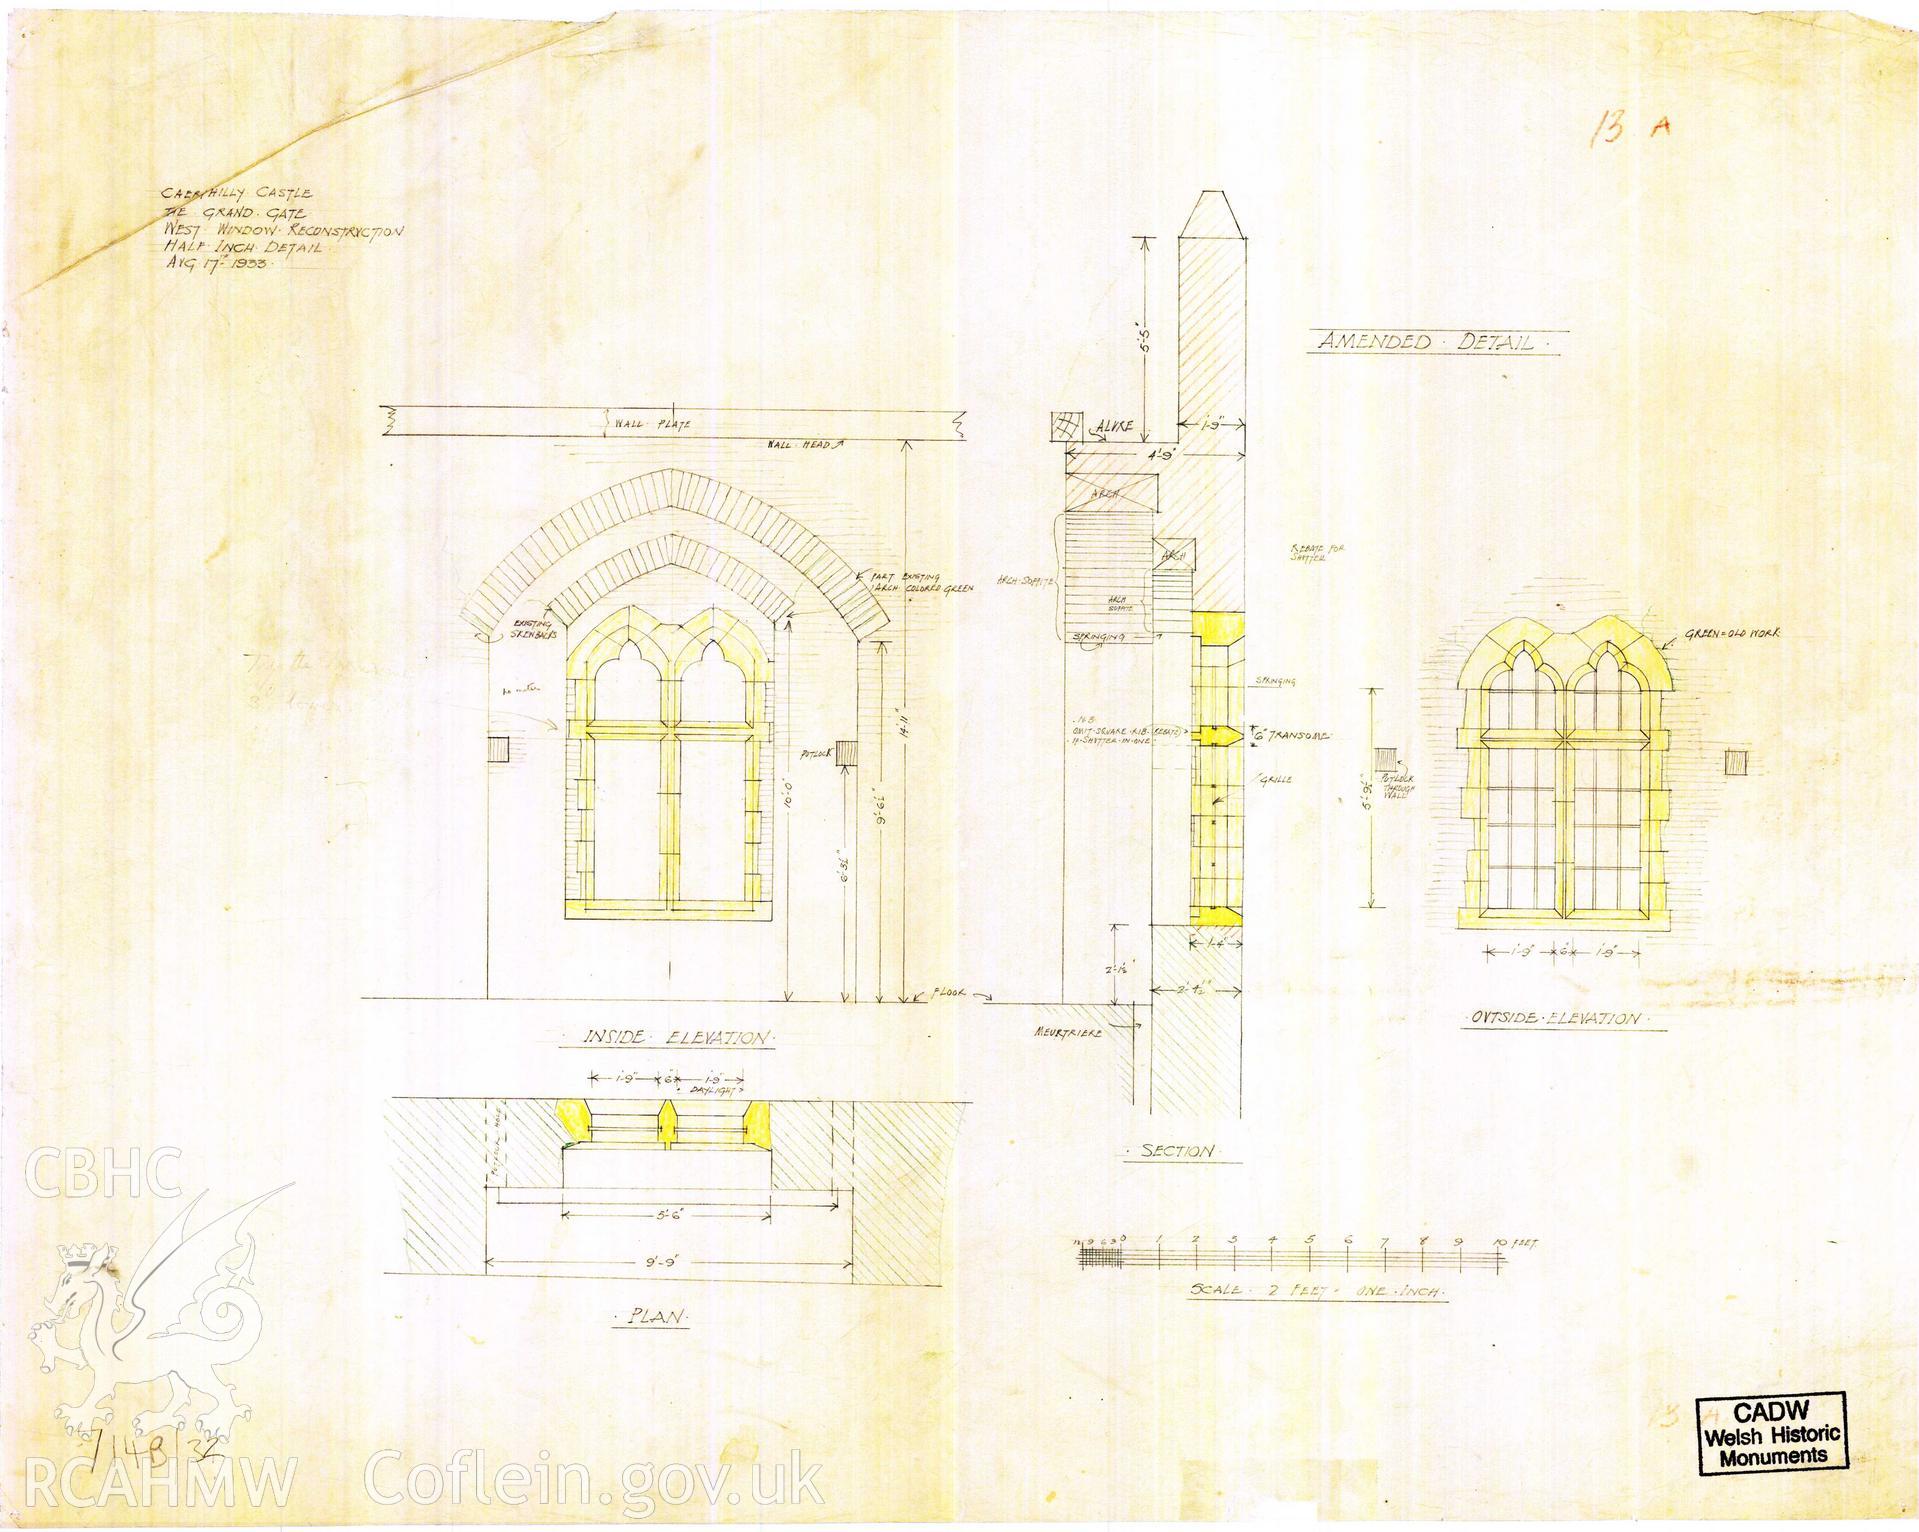 Digital copy of Cadw guardianship monument drawing of Caerphilly Castle. Outer E gate, W window. Cadw ref. no: 714B/32. Scale 1:24.  Original drawing withdrawn and returned to Cadw at their request.